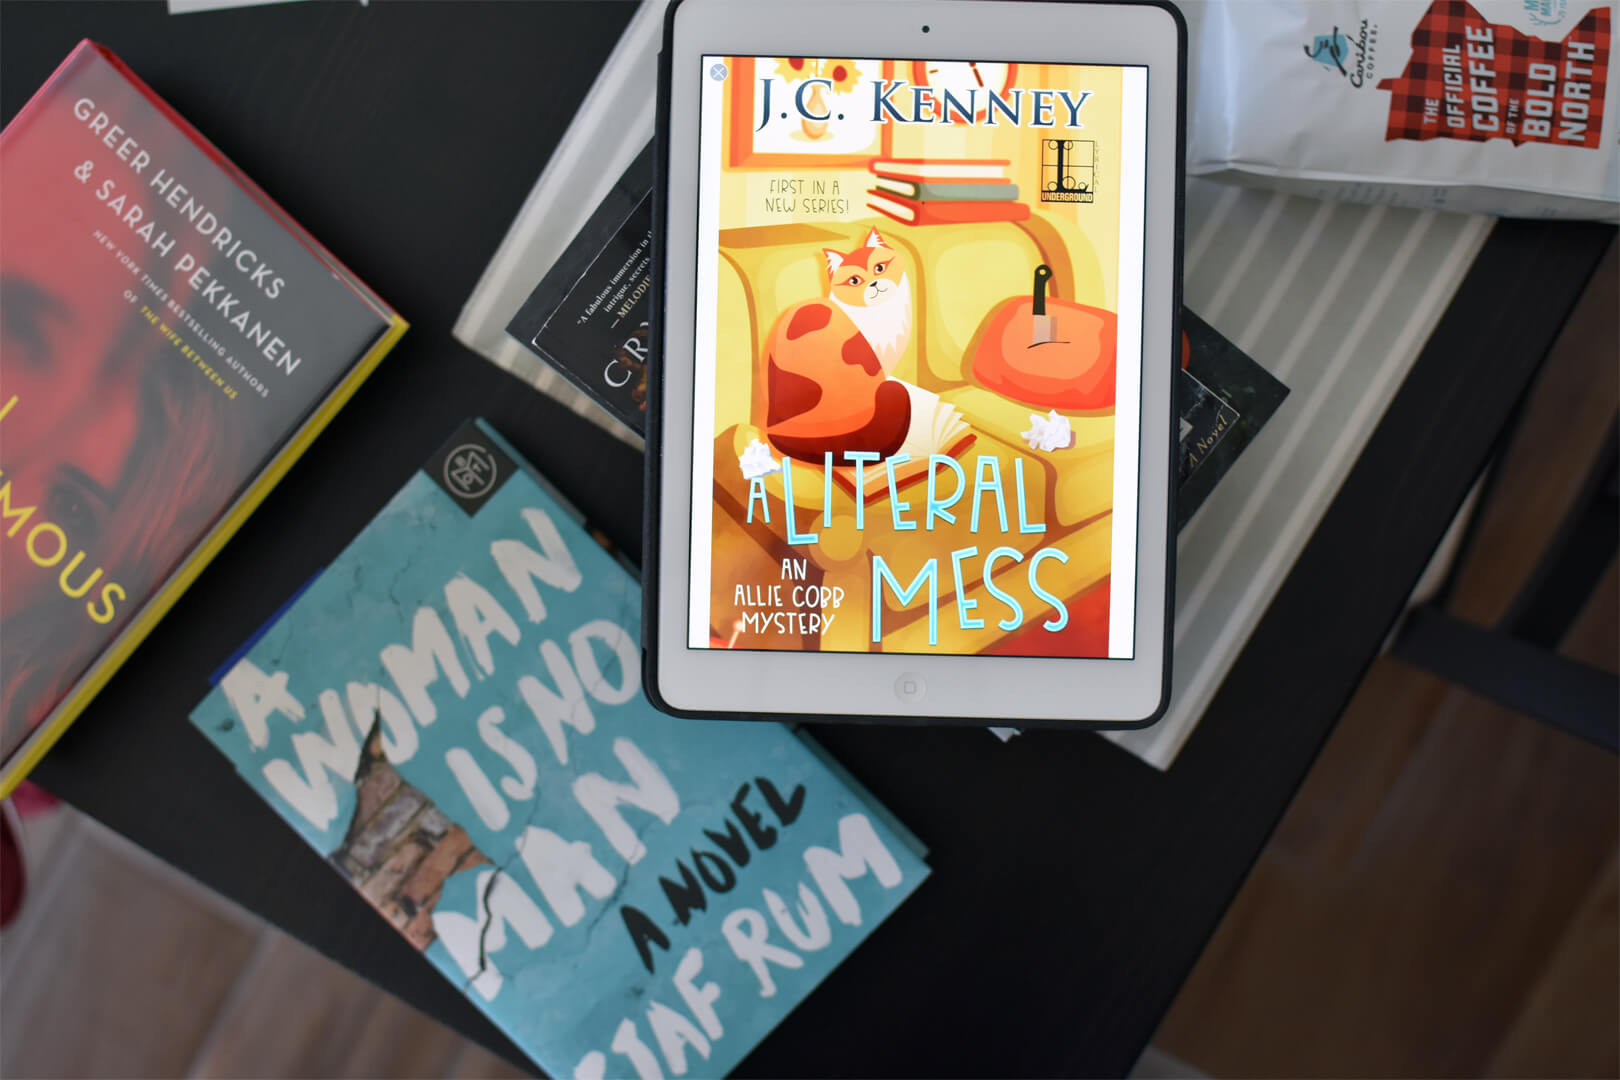 Flash Review: A Literal Mess by J.C. Kenney